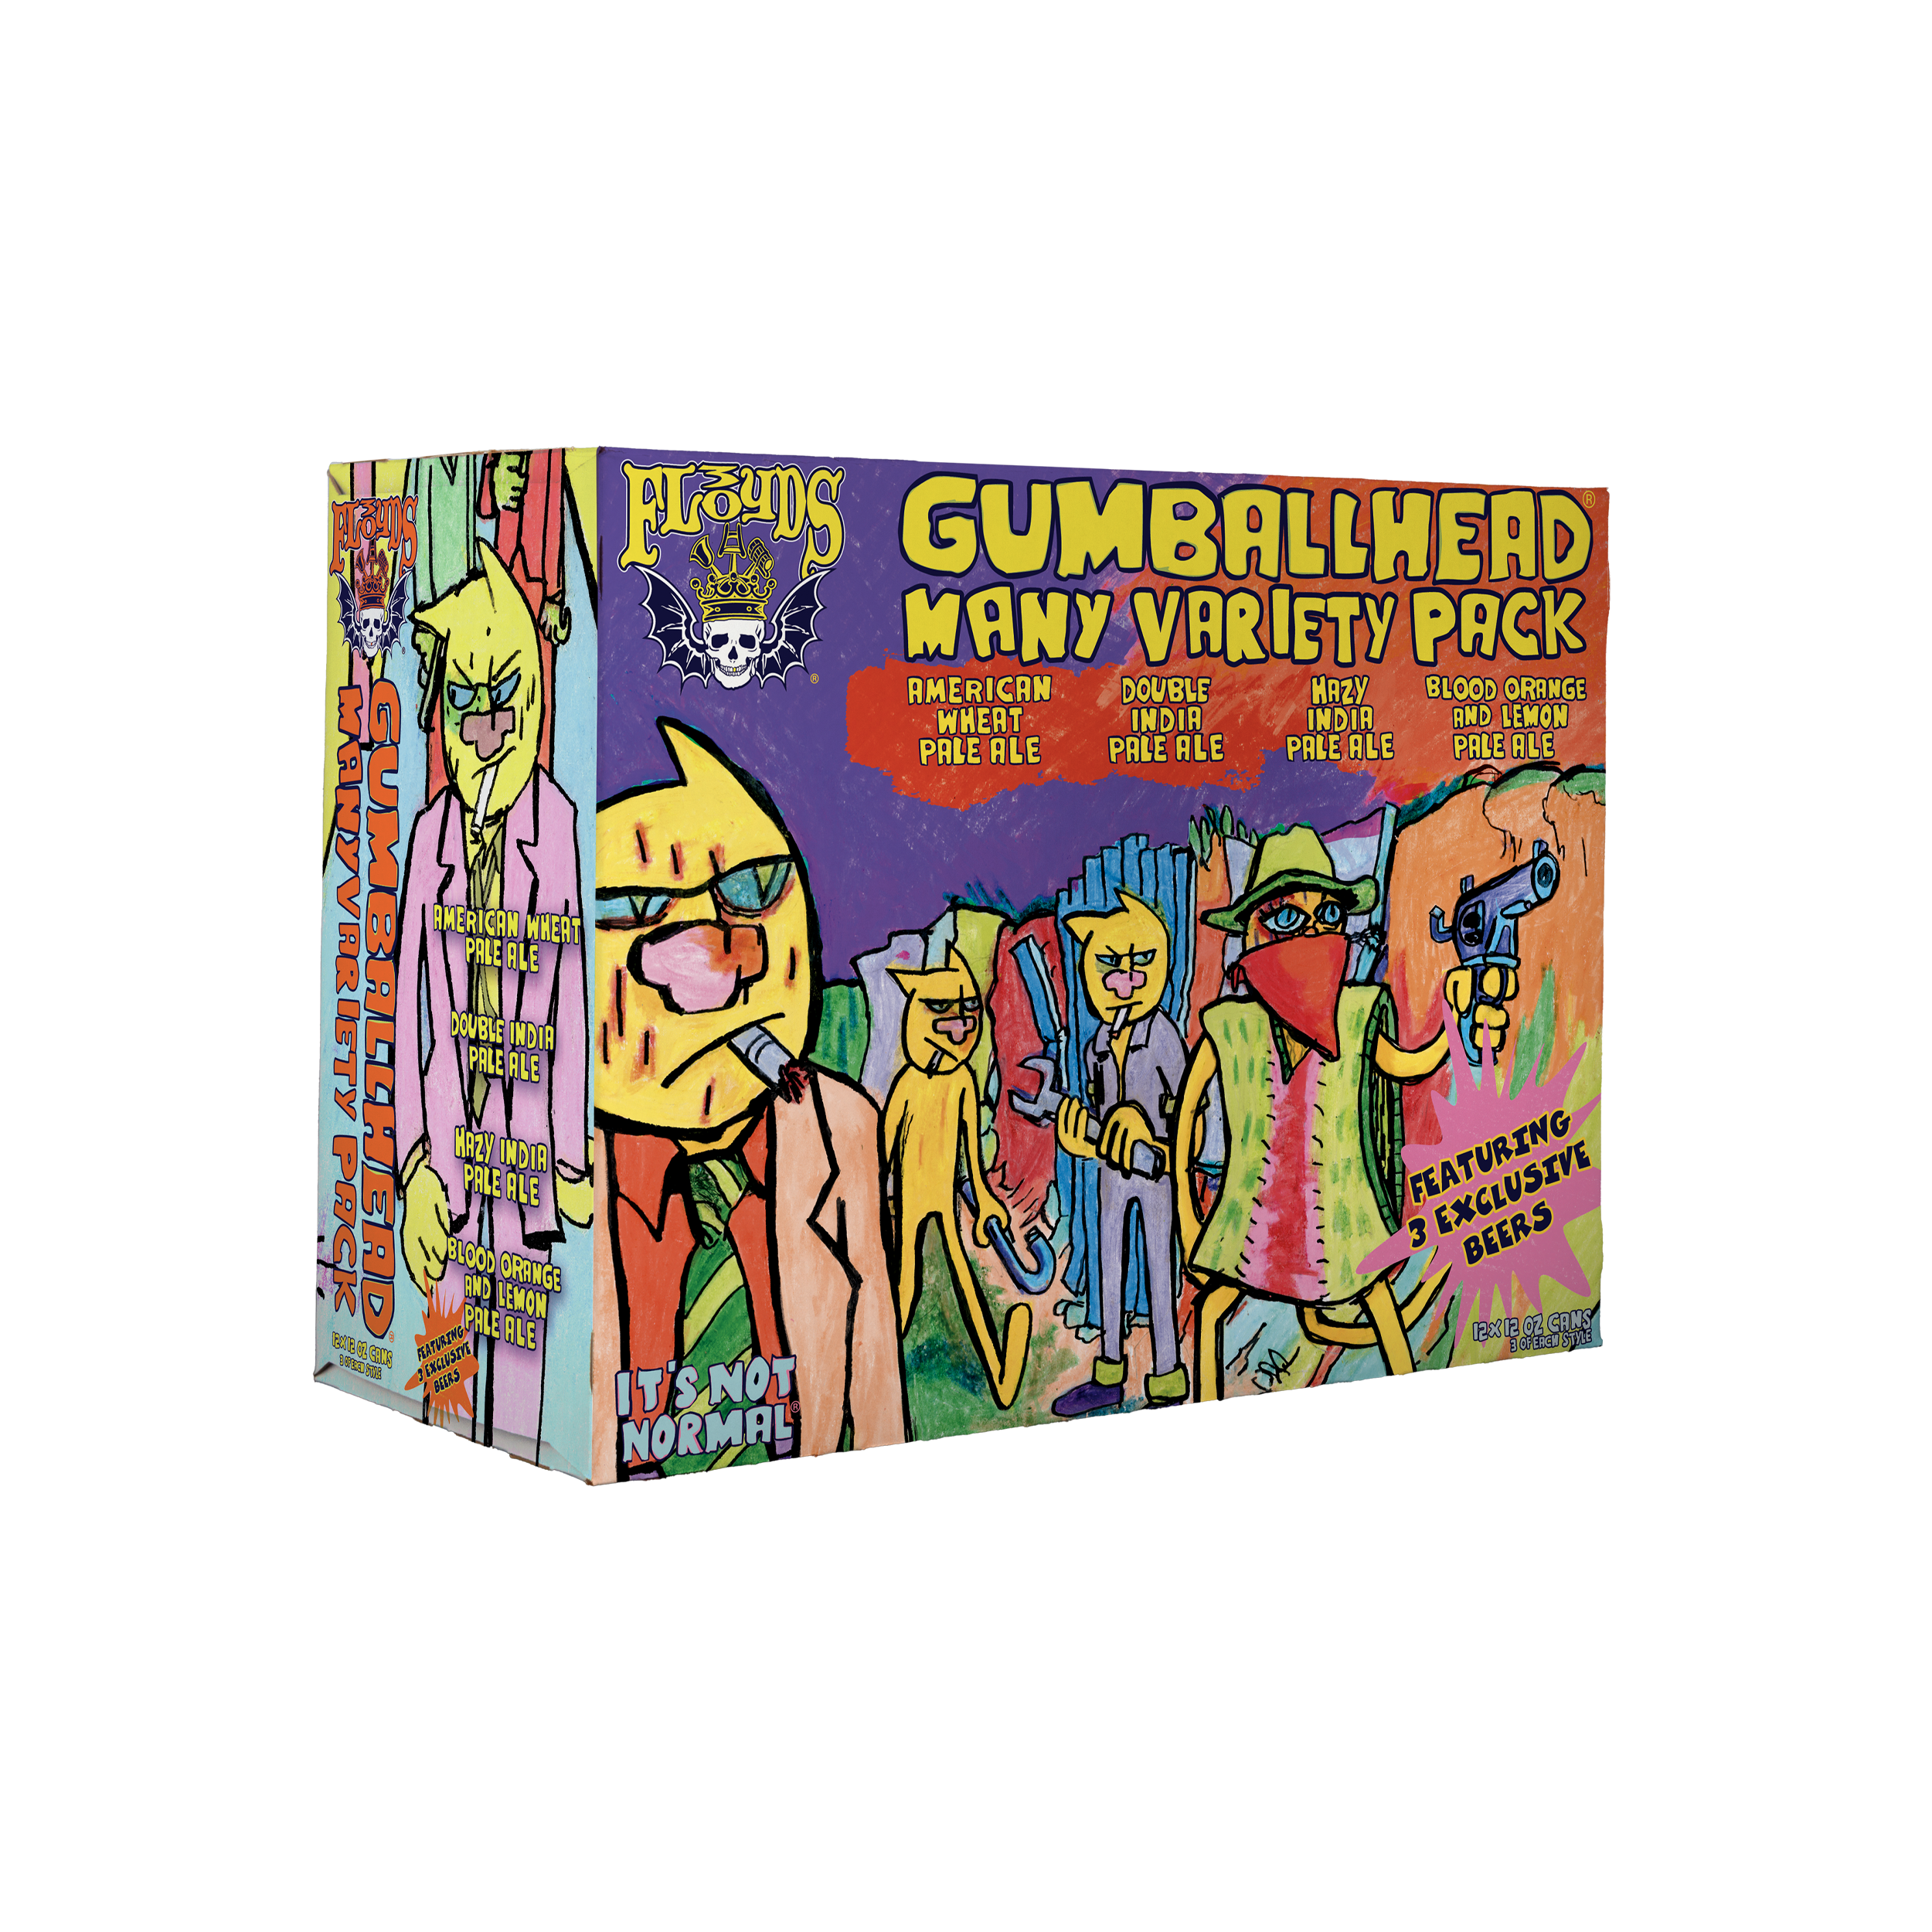 Gumballhead Many Variety 12 pack – 12oz Cans – PICK-UP ONLY